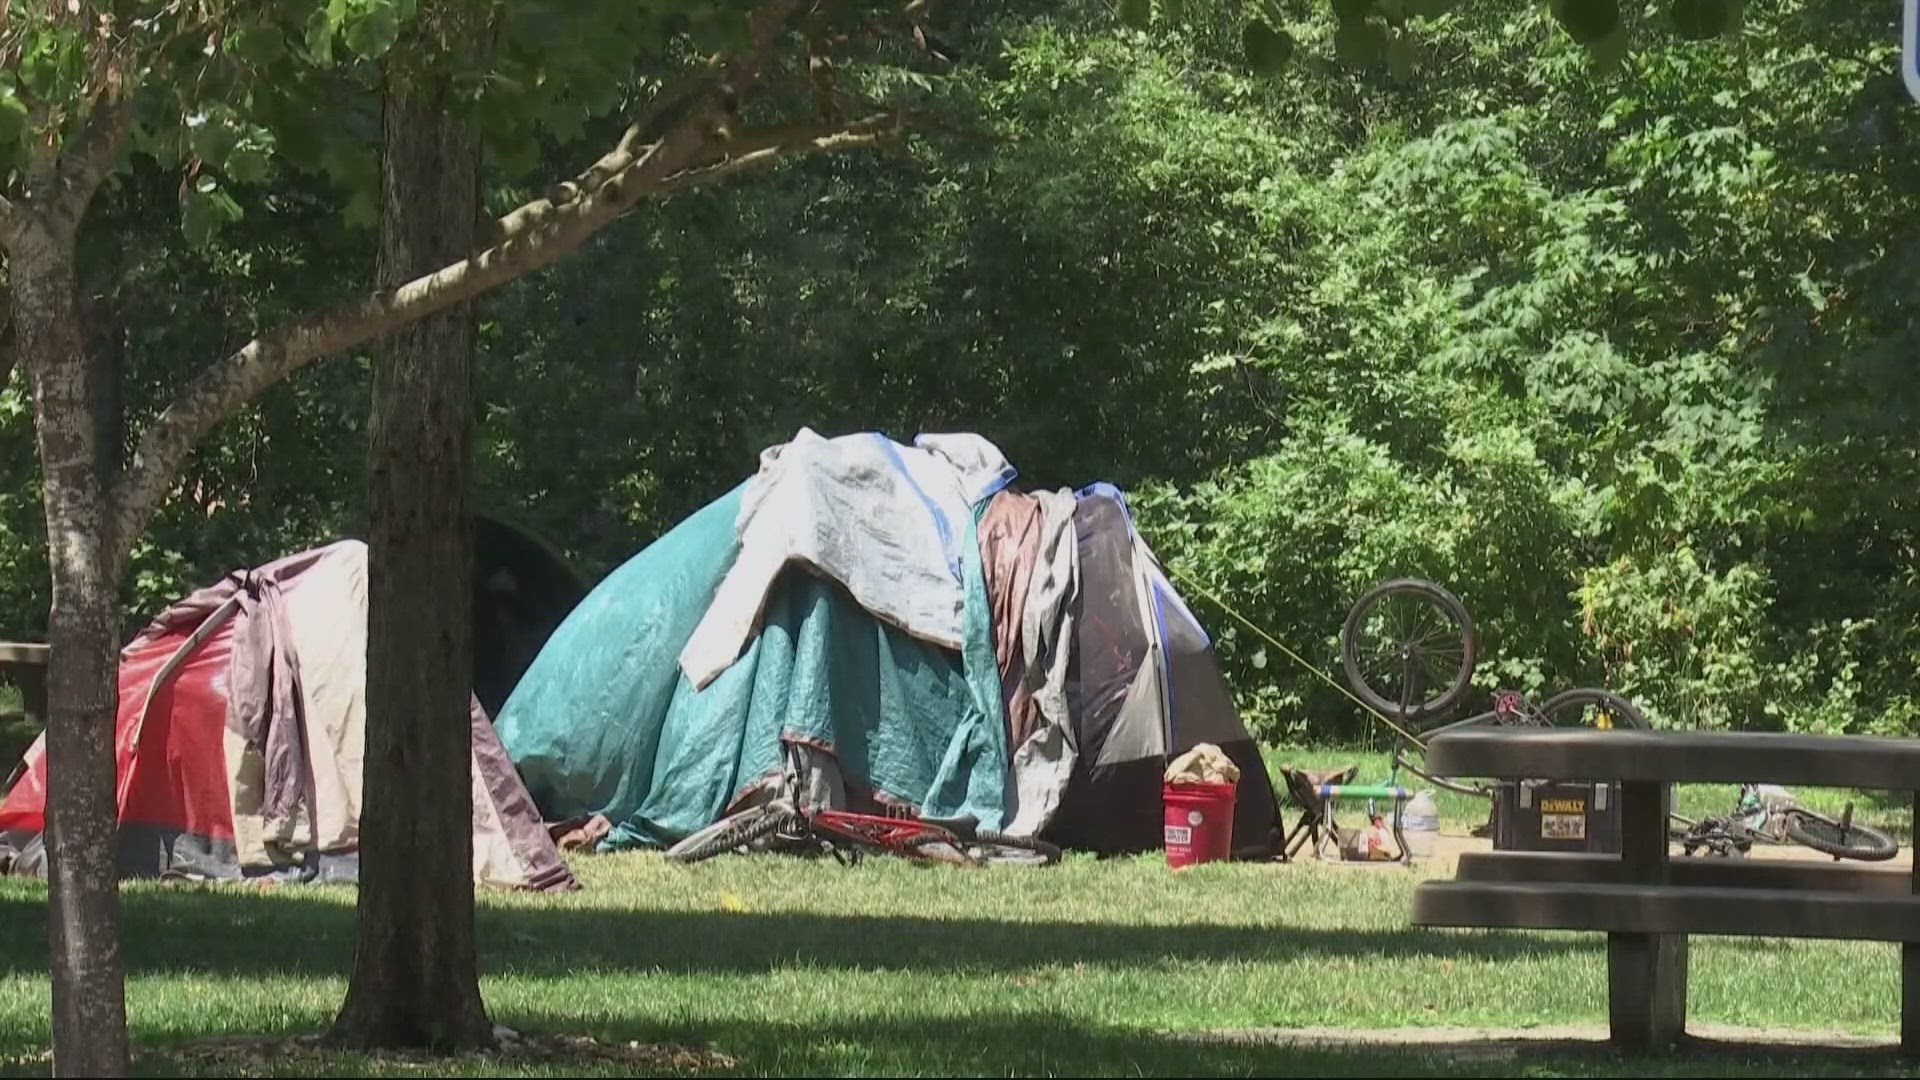 On Monday, the U.S. Supreme Court will hear a case that could change how cities like Portland deal with homelessness.